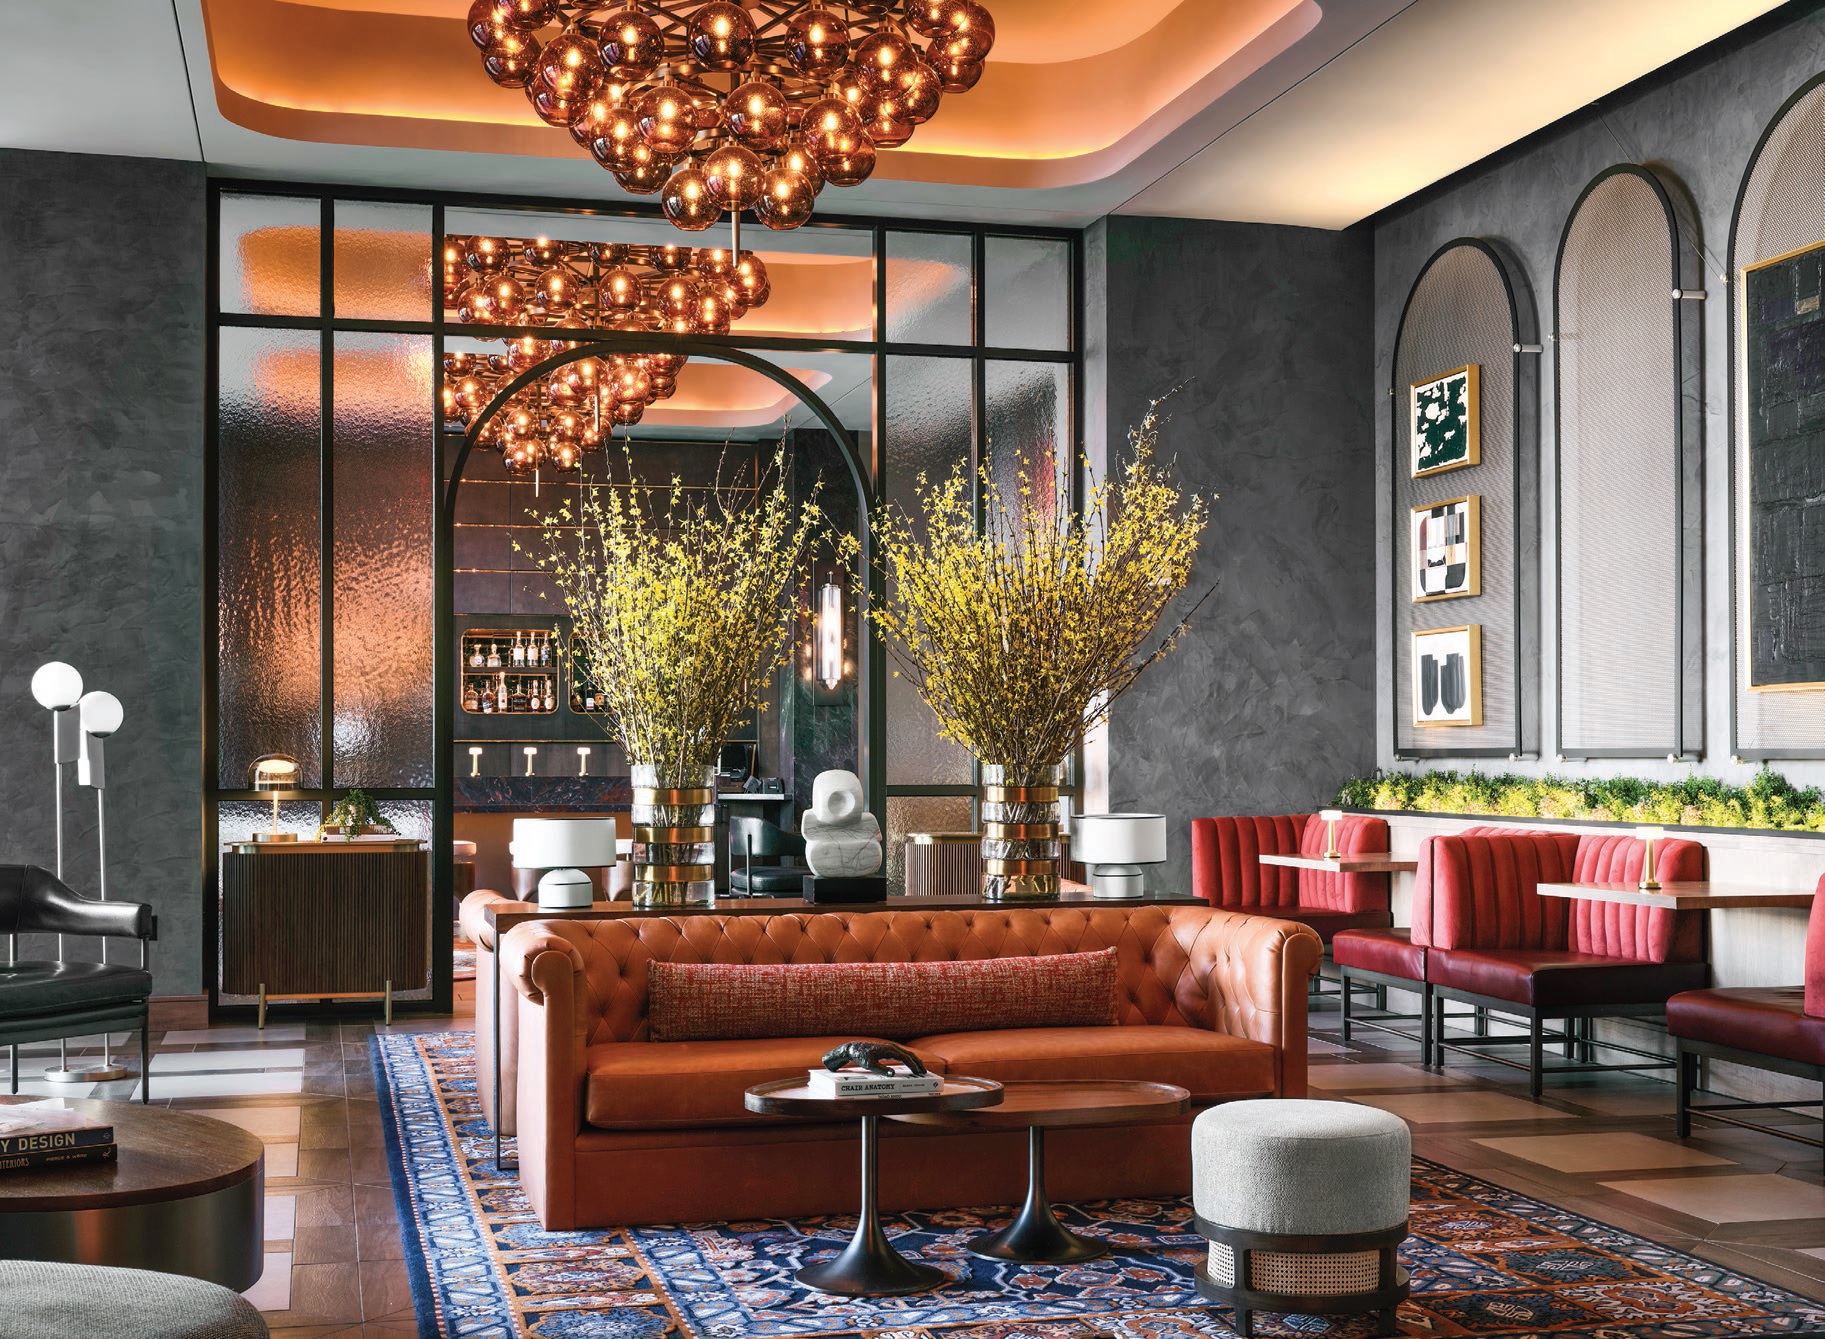 Thompson Buckhead’s interiors, including the lobby pictured here, were brought to life by Studio 11 Design PHOTO BY DOUGLAS FRIEDMAN